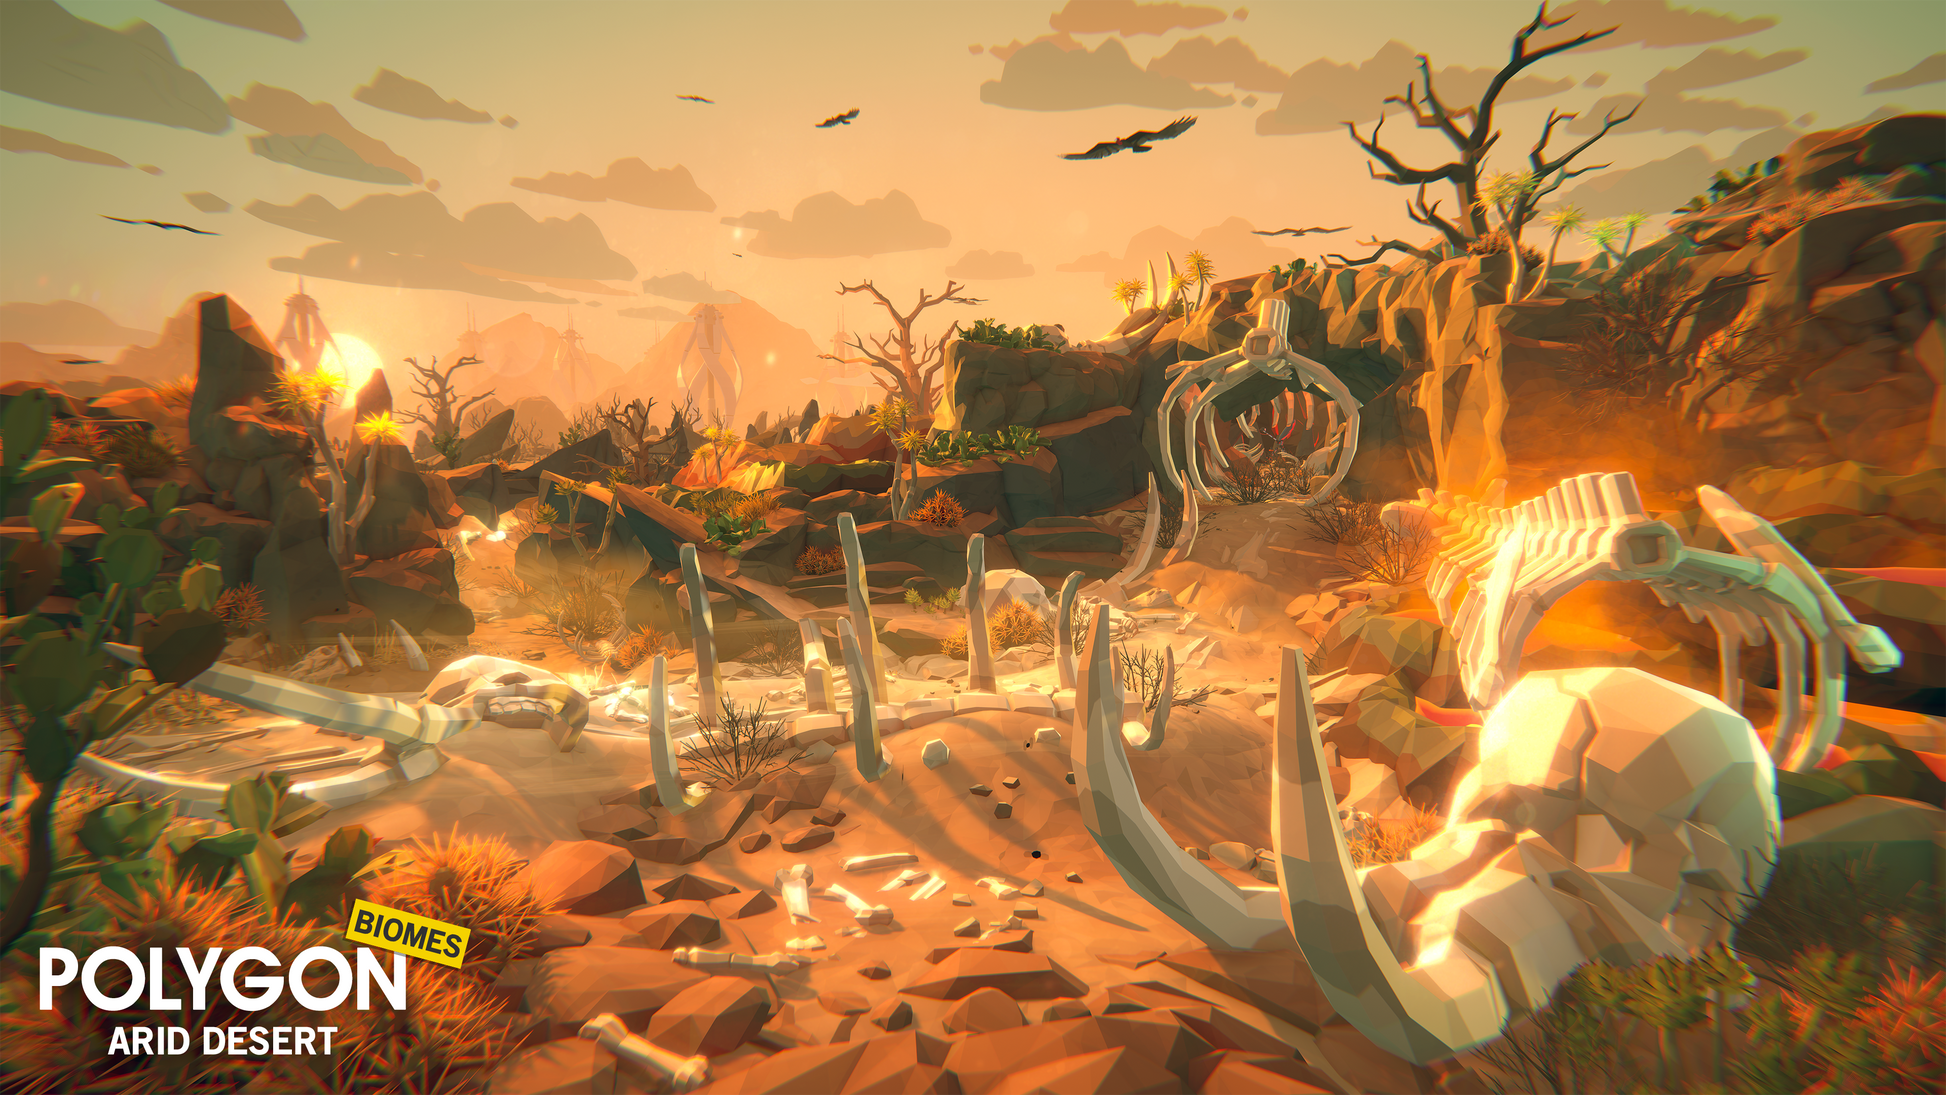 Bones, trees, fires and wildlife examples from the POLYGON arid desert asset pack